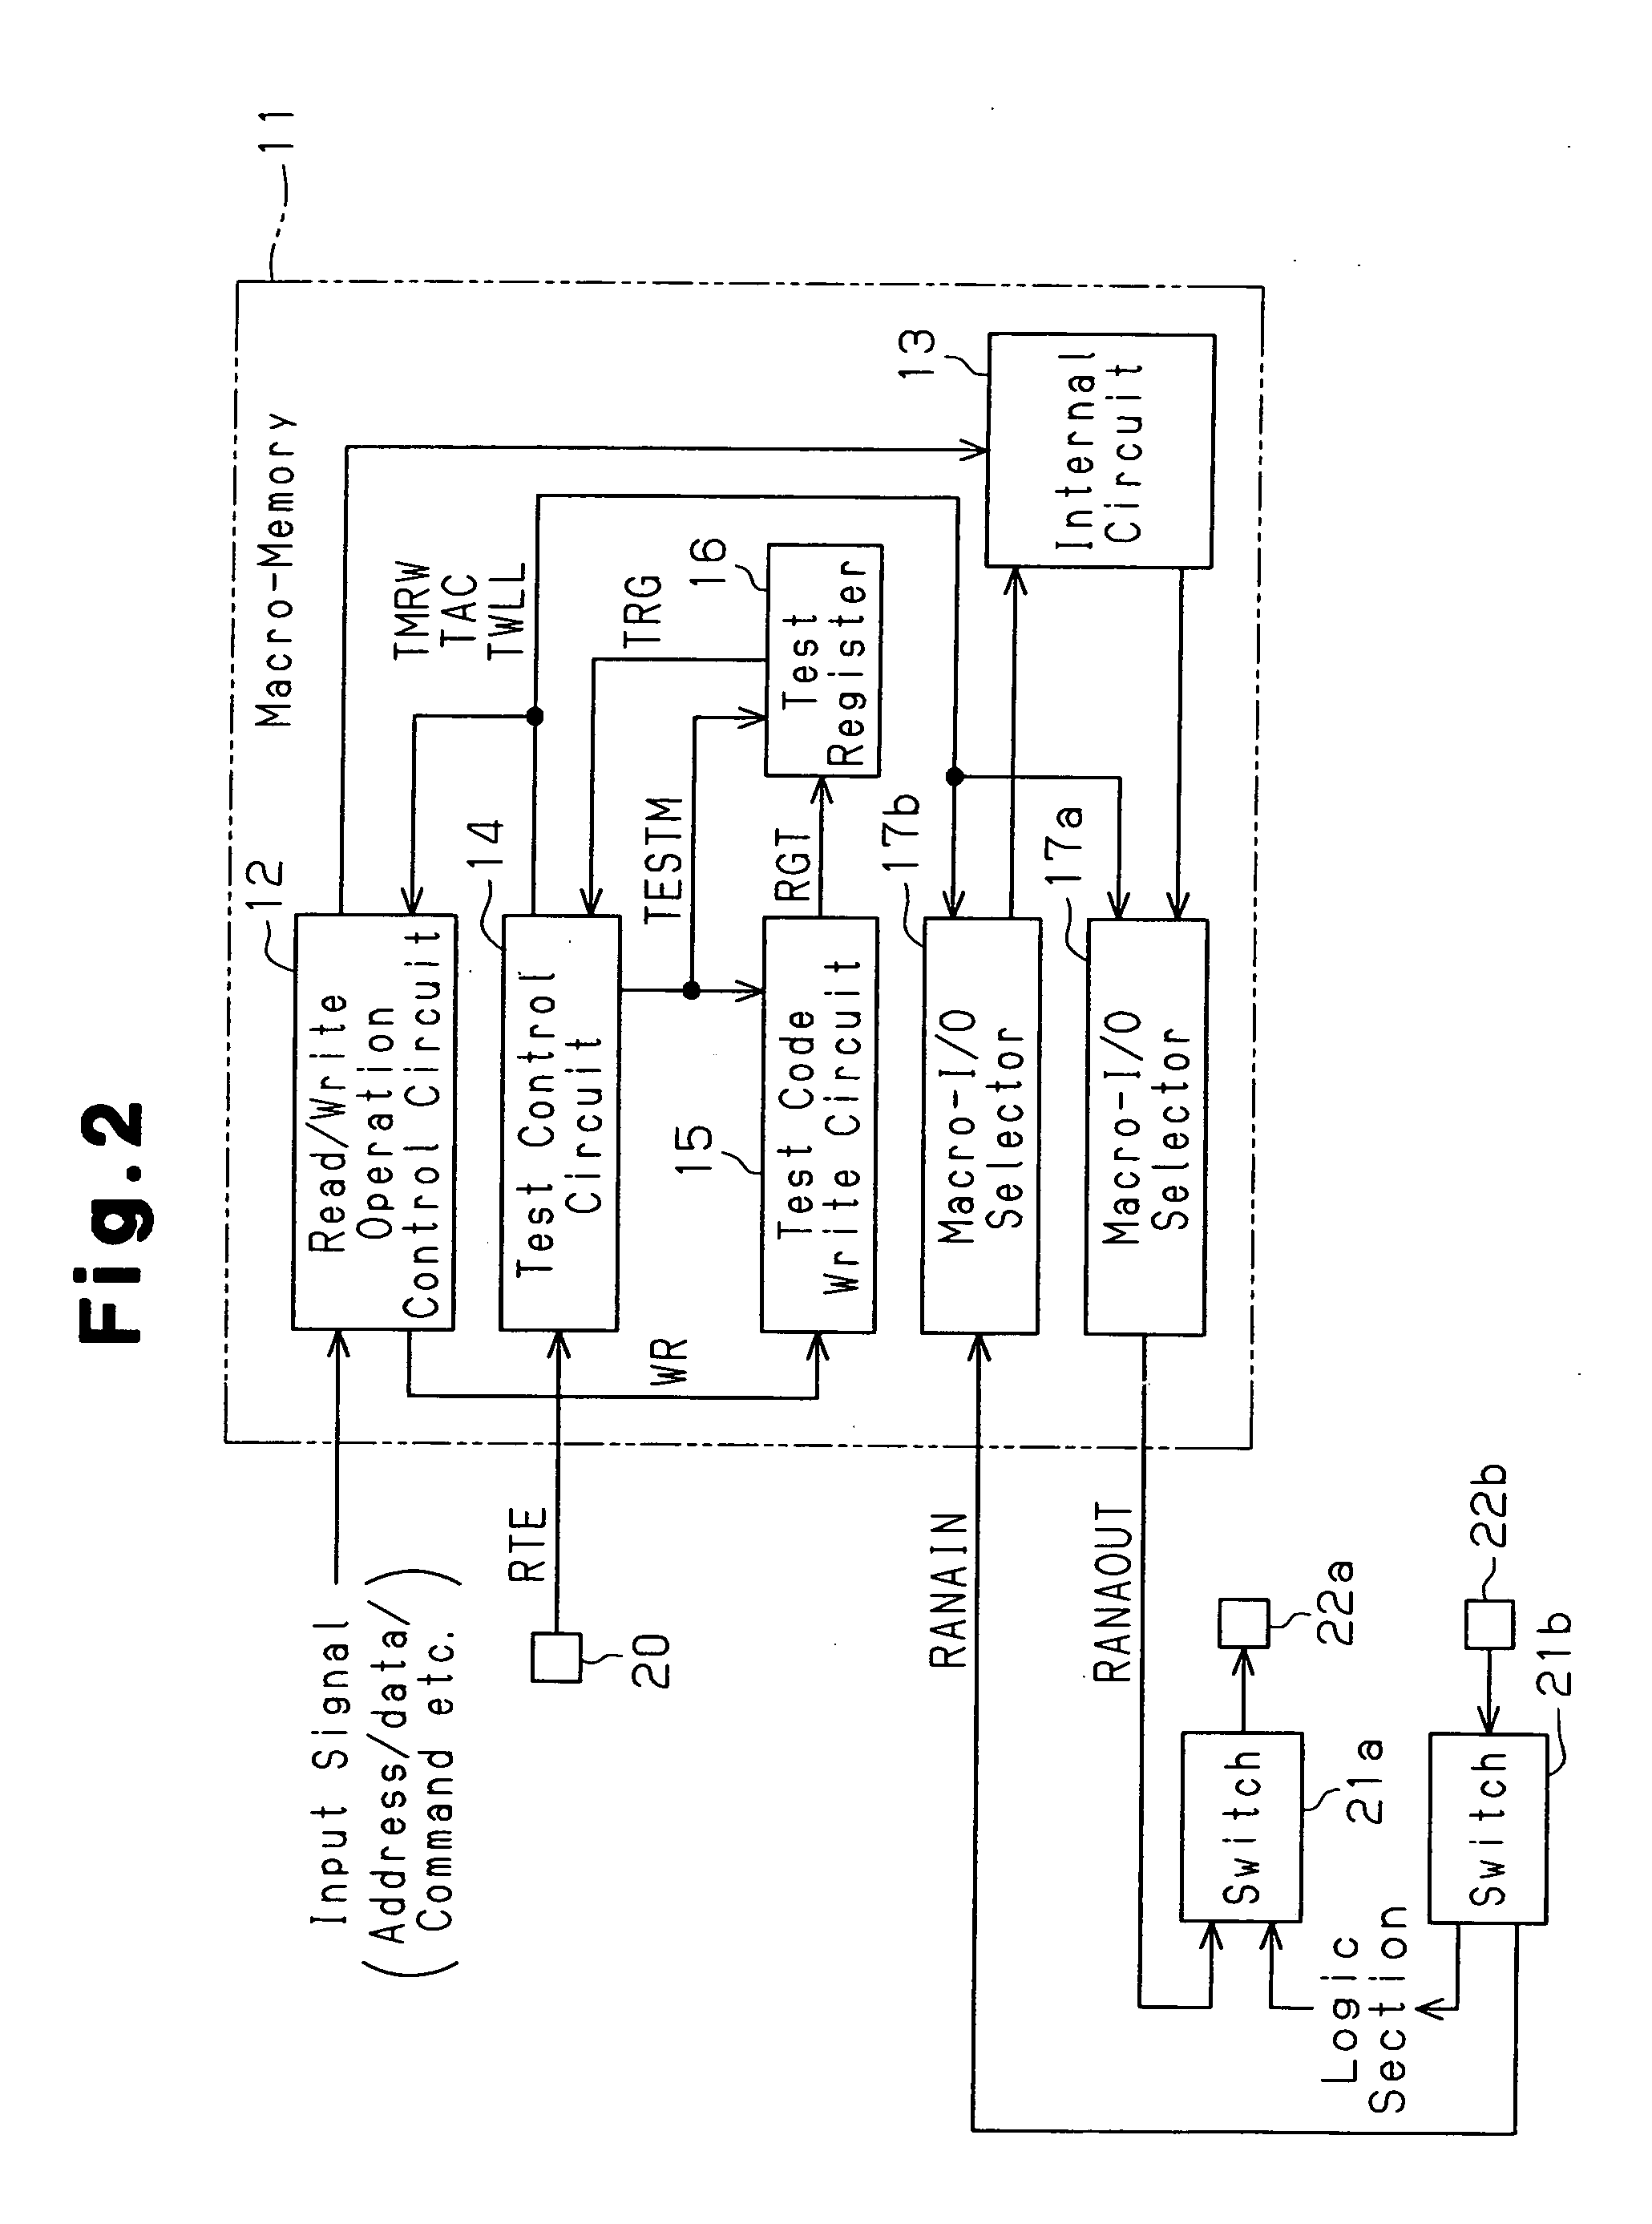 Semiconductor device and method for testing the same